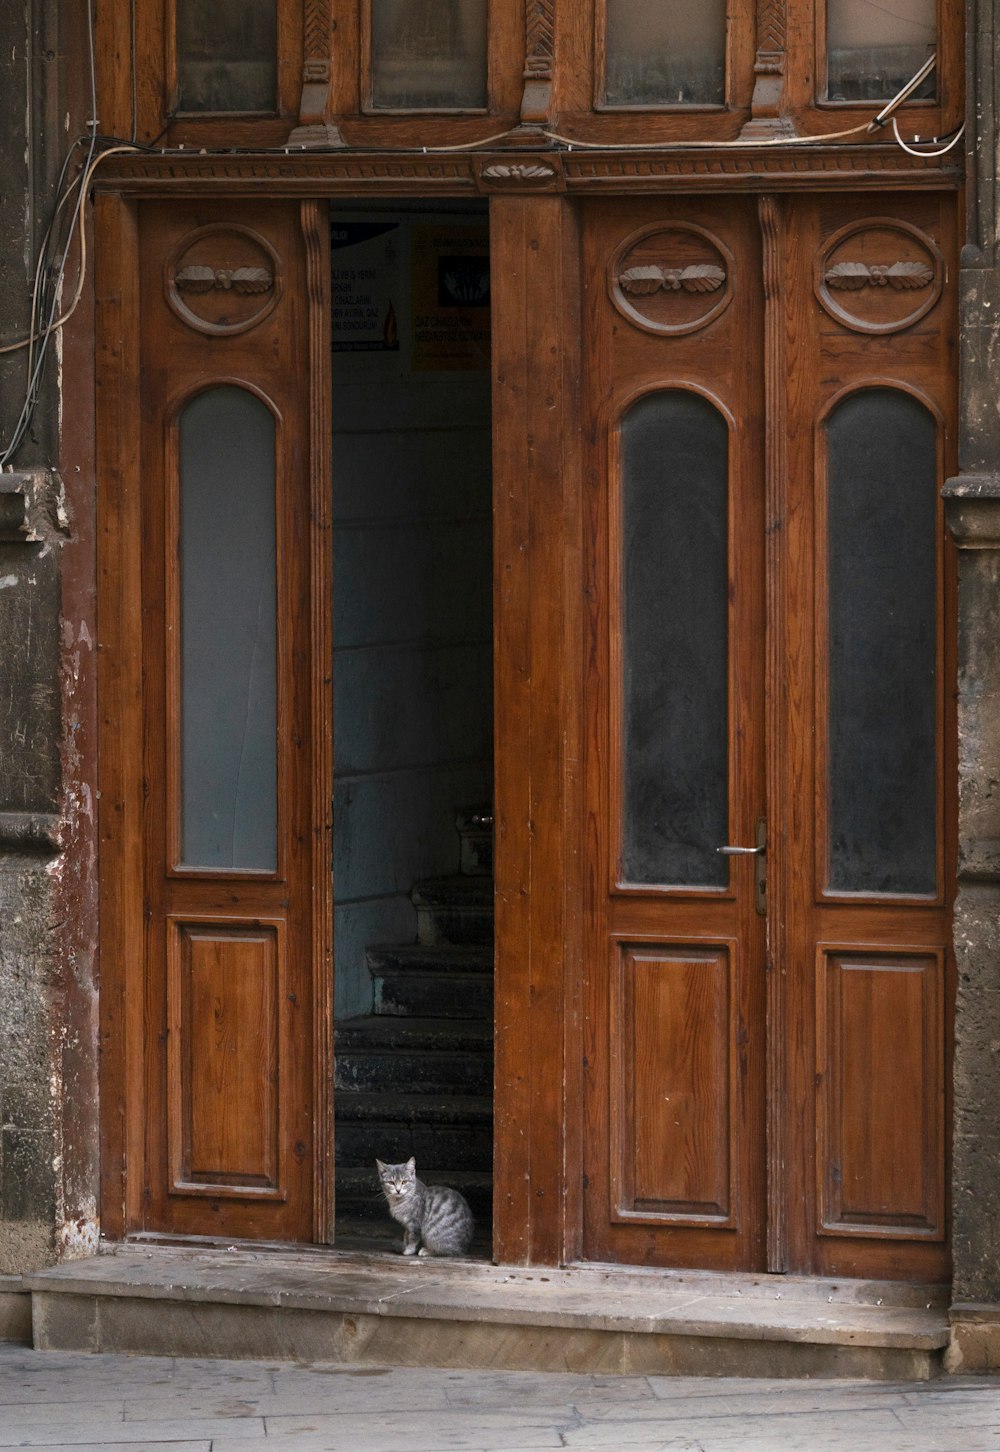 a cat sitting in the doorway of a building